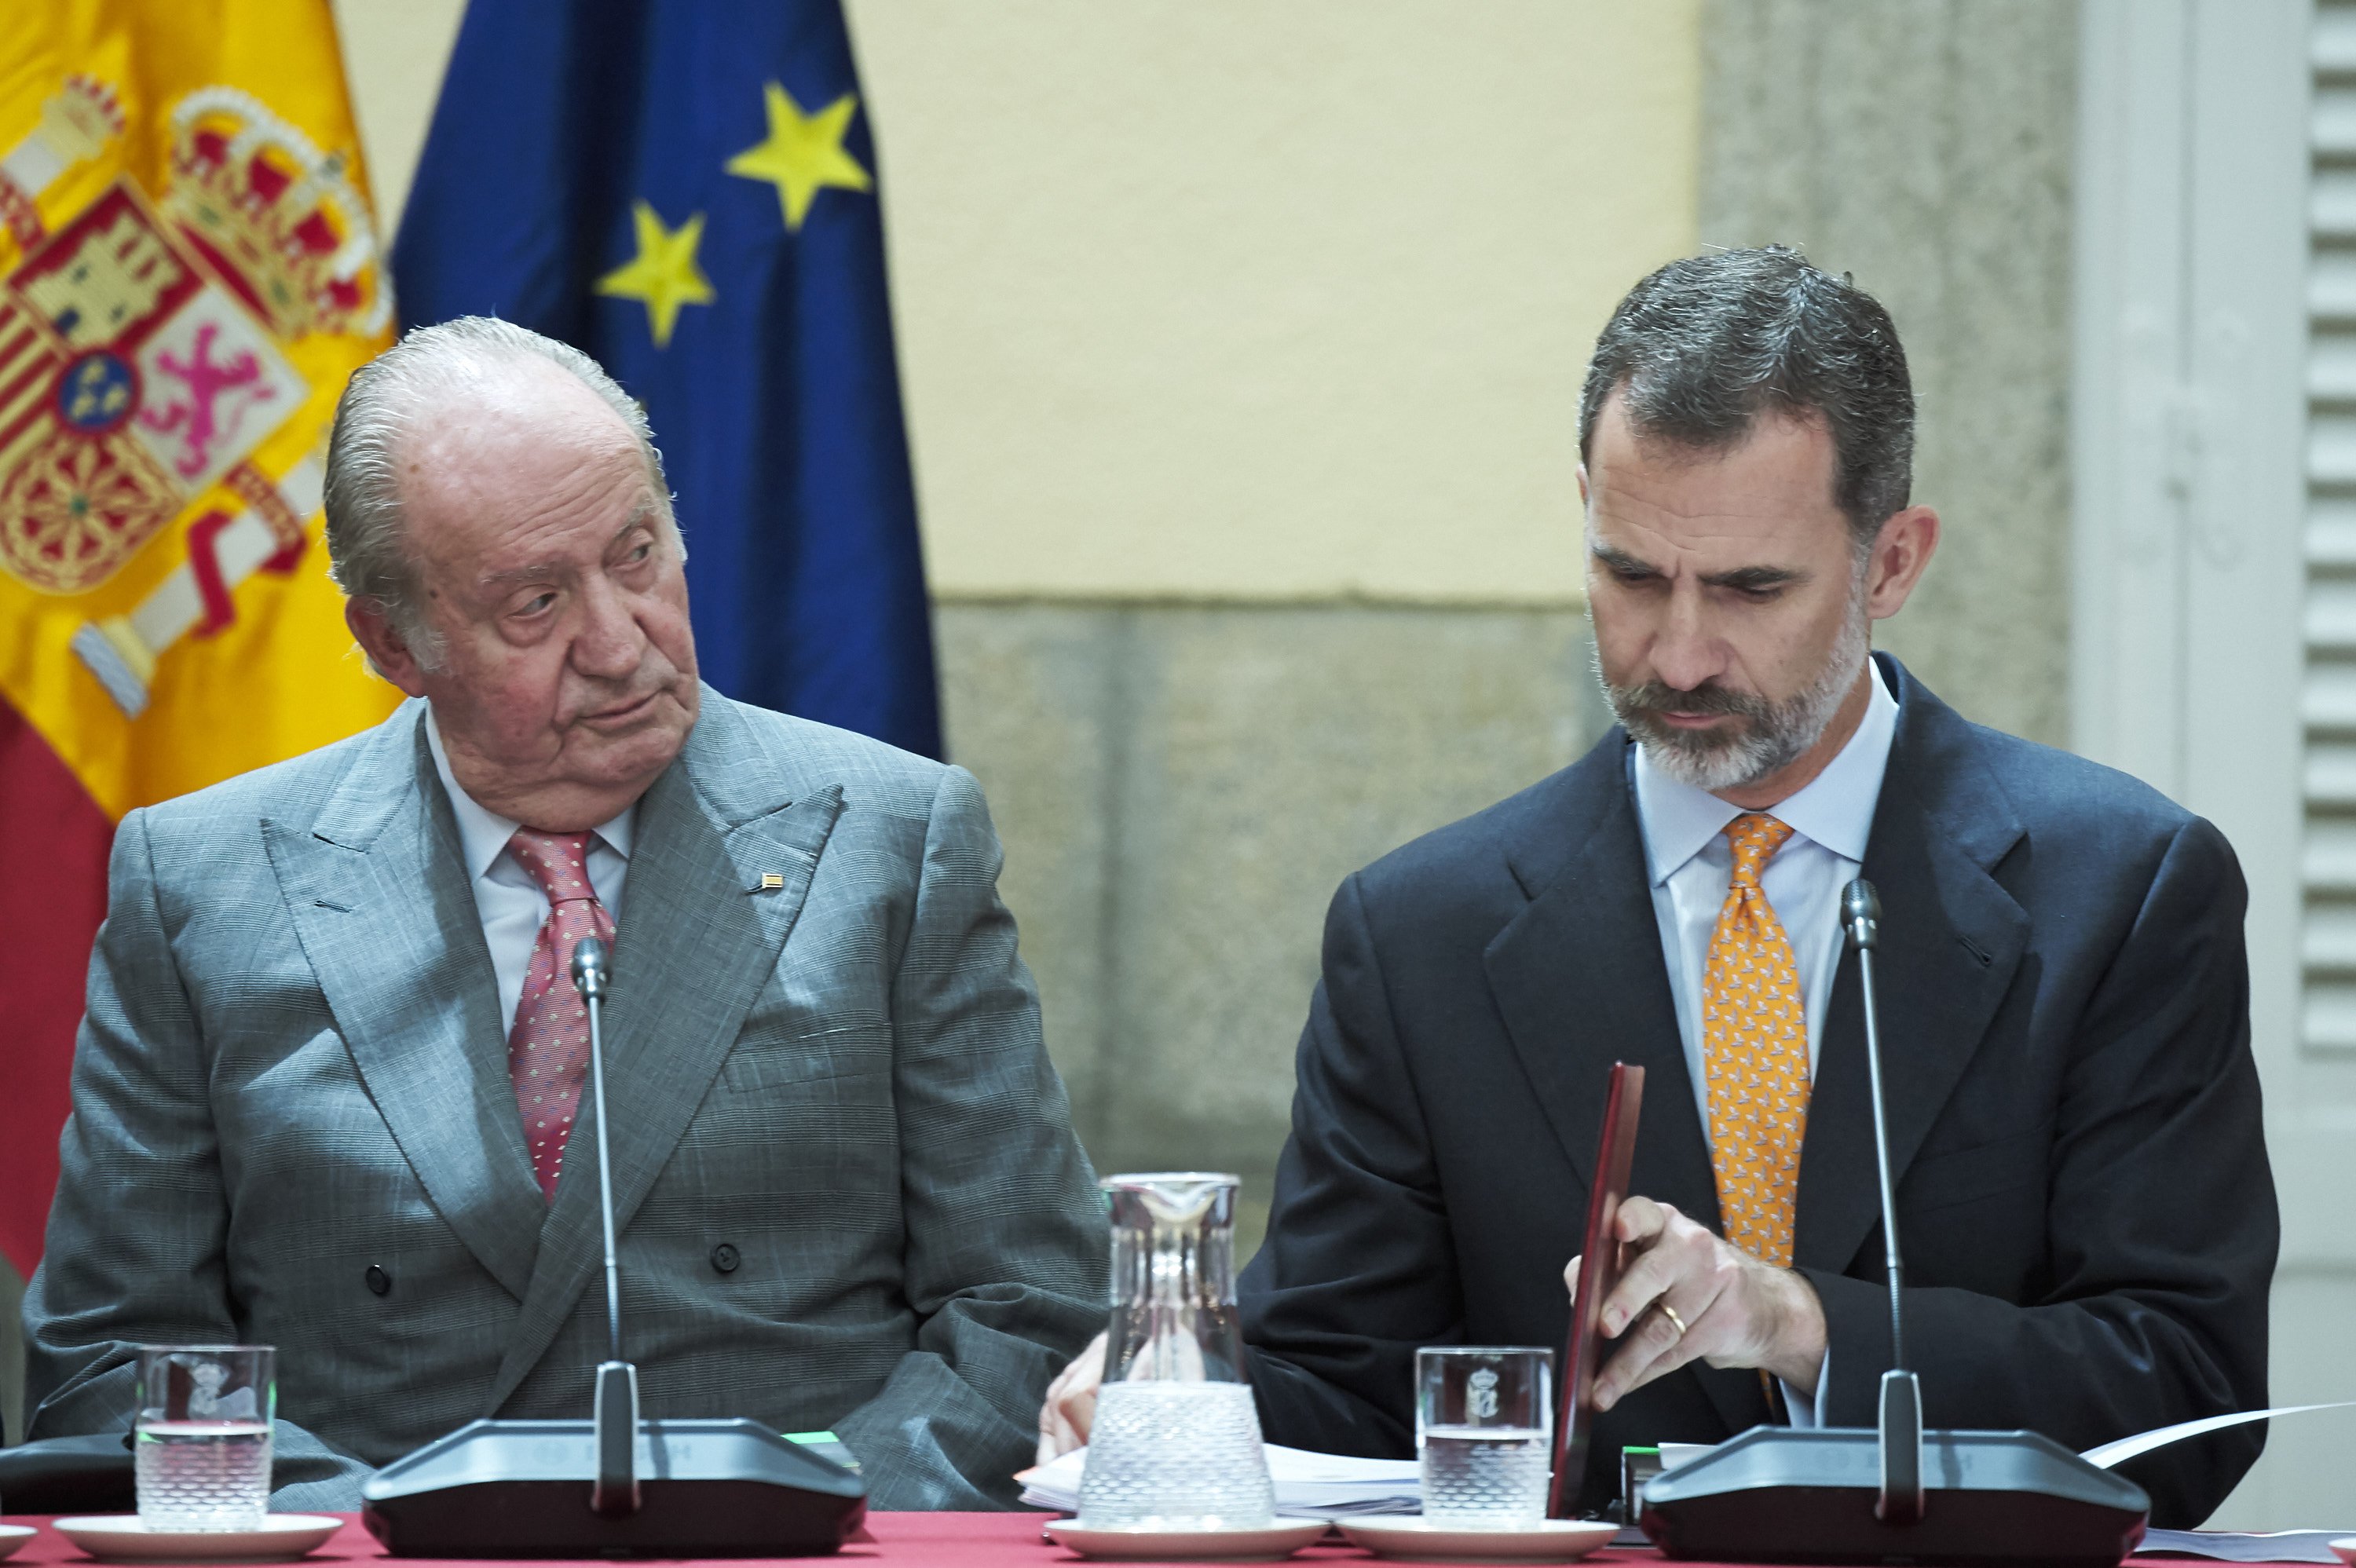 King Felipe VI of Spain and his son King Juan Carlos during the COTEC meeting at the El Pardo Palace on May 31, 2017 in Madrid, Spain. | Source: Getty Images